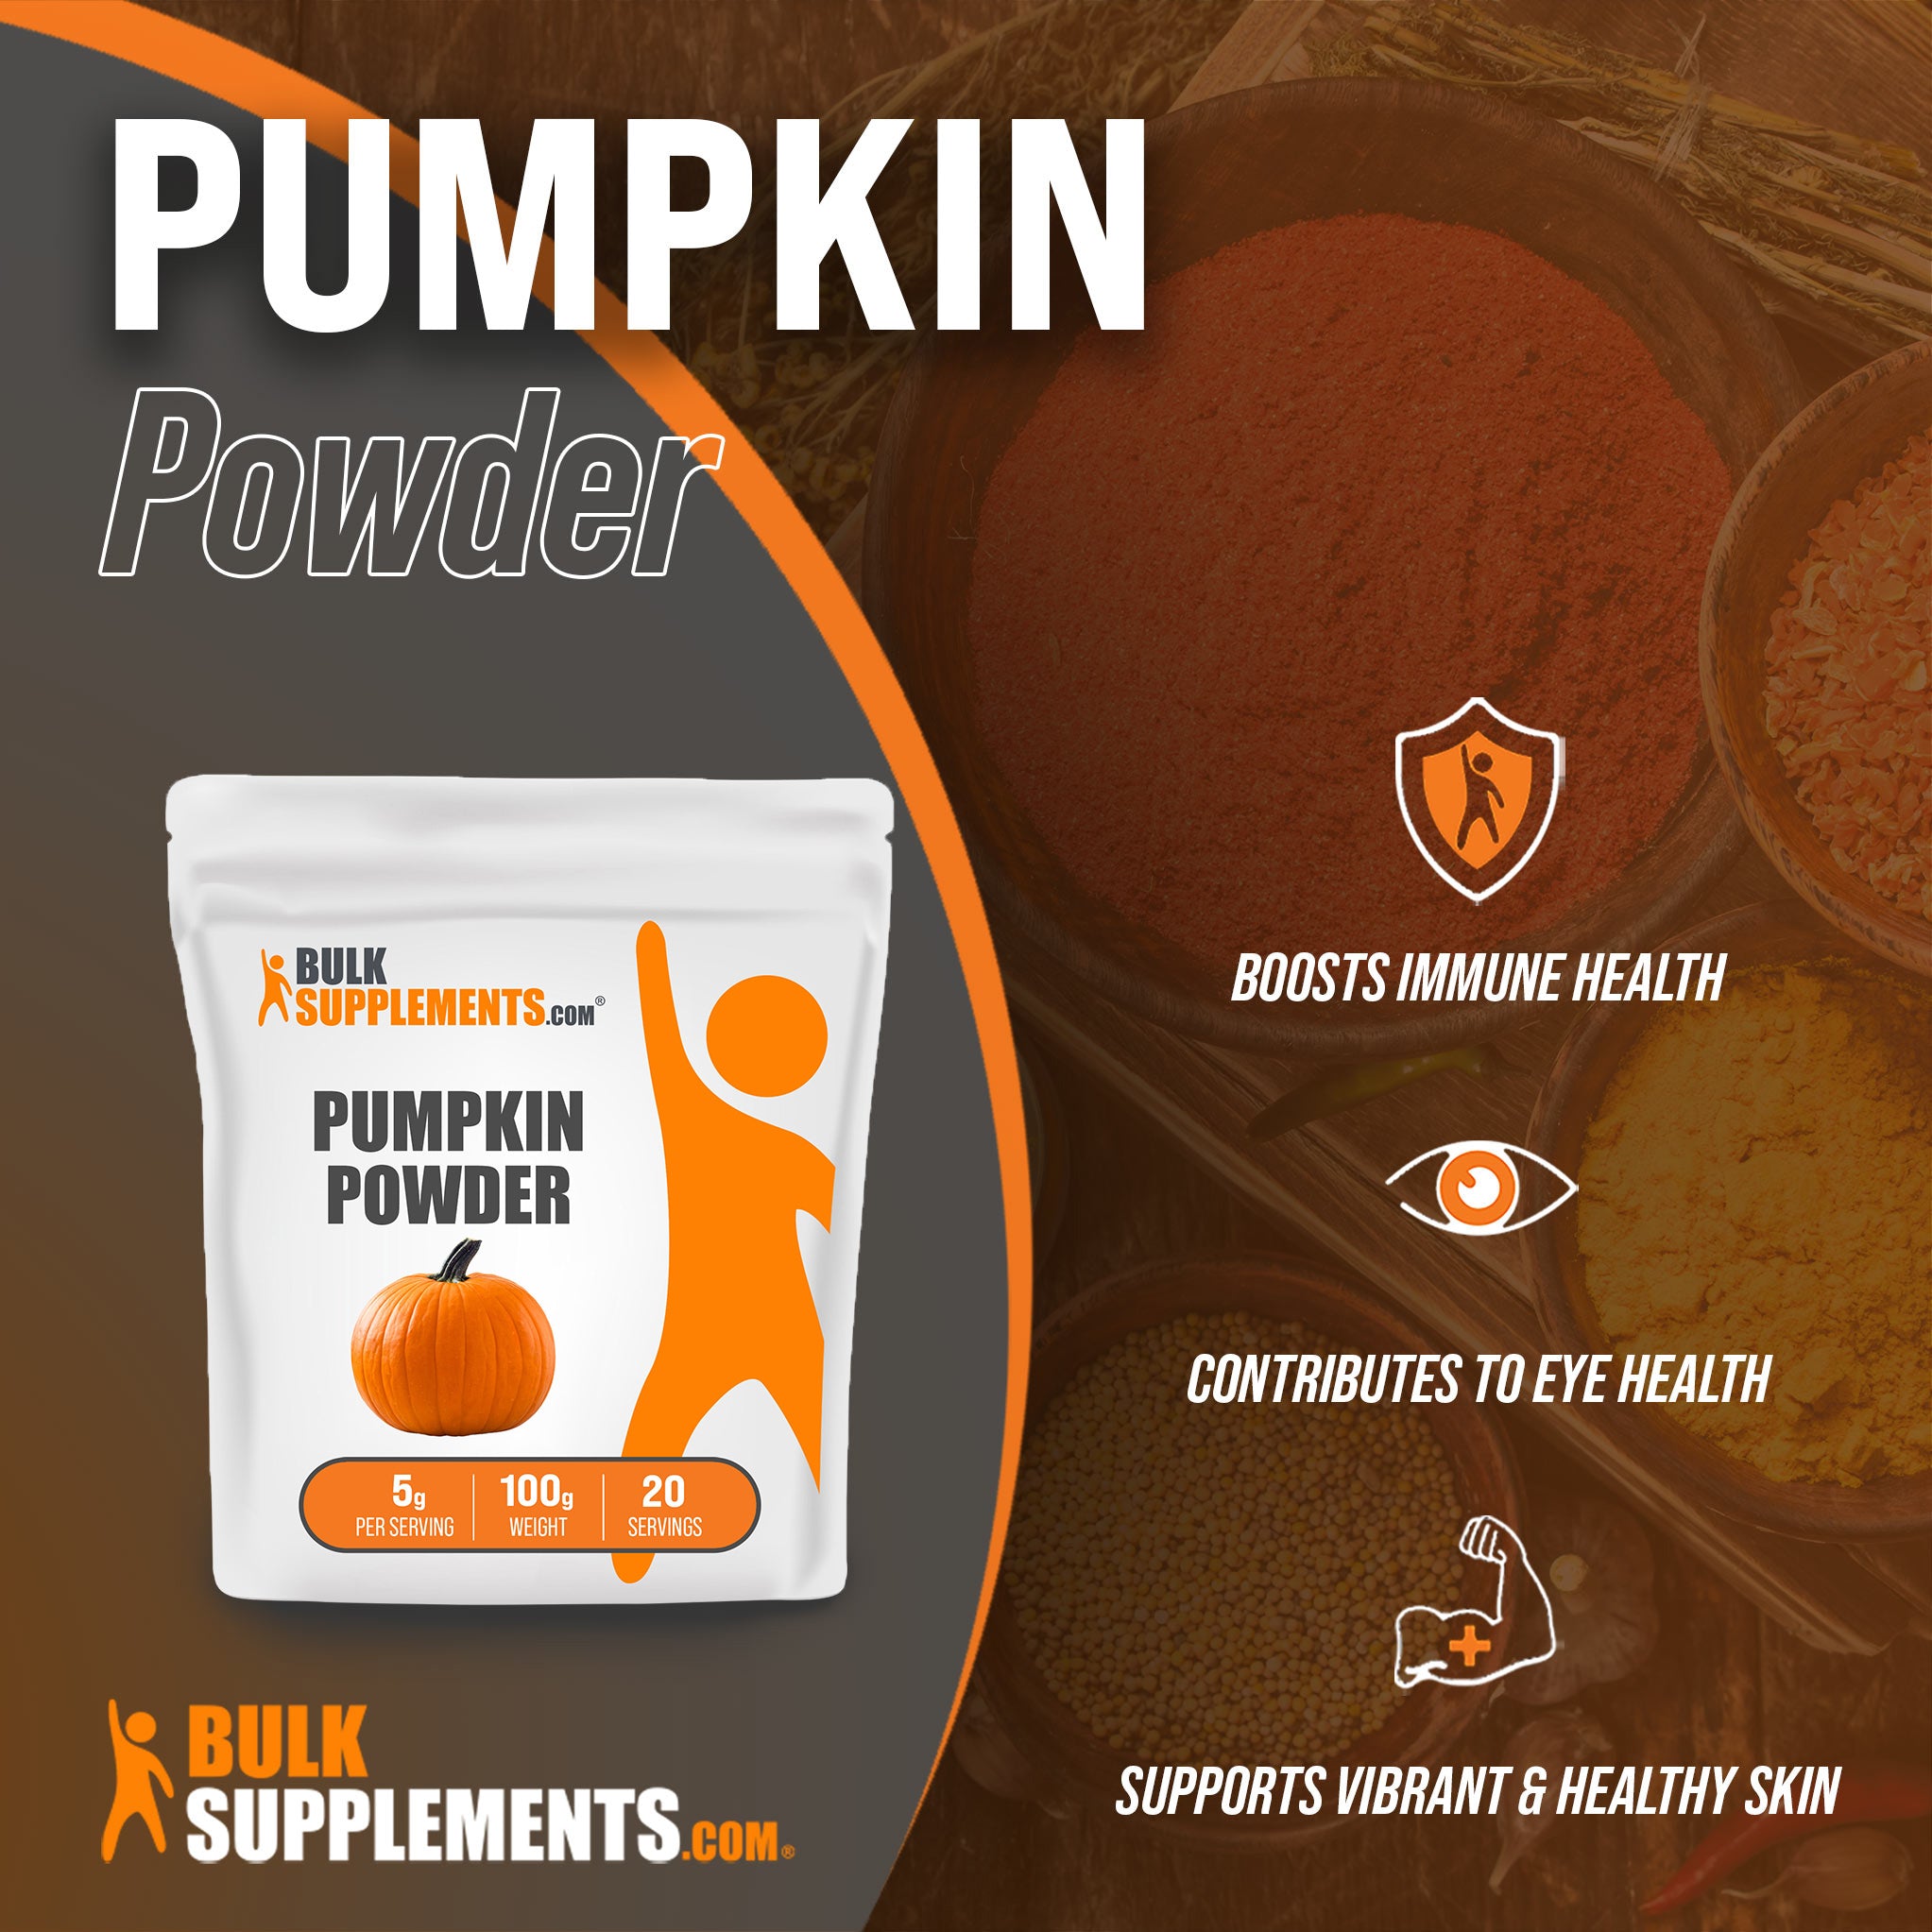 Benefits of Pumpkin Powder: boosts immune health, contributes to eye health, supports vibrant and healthy skin